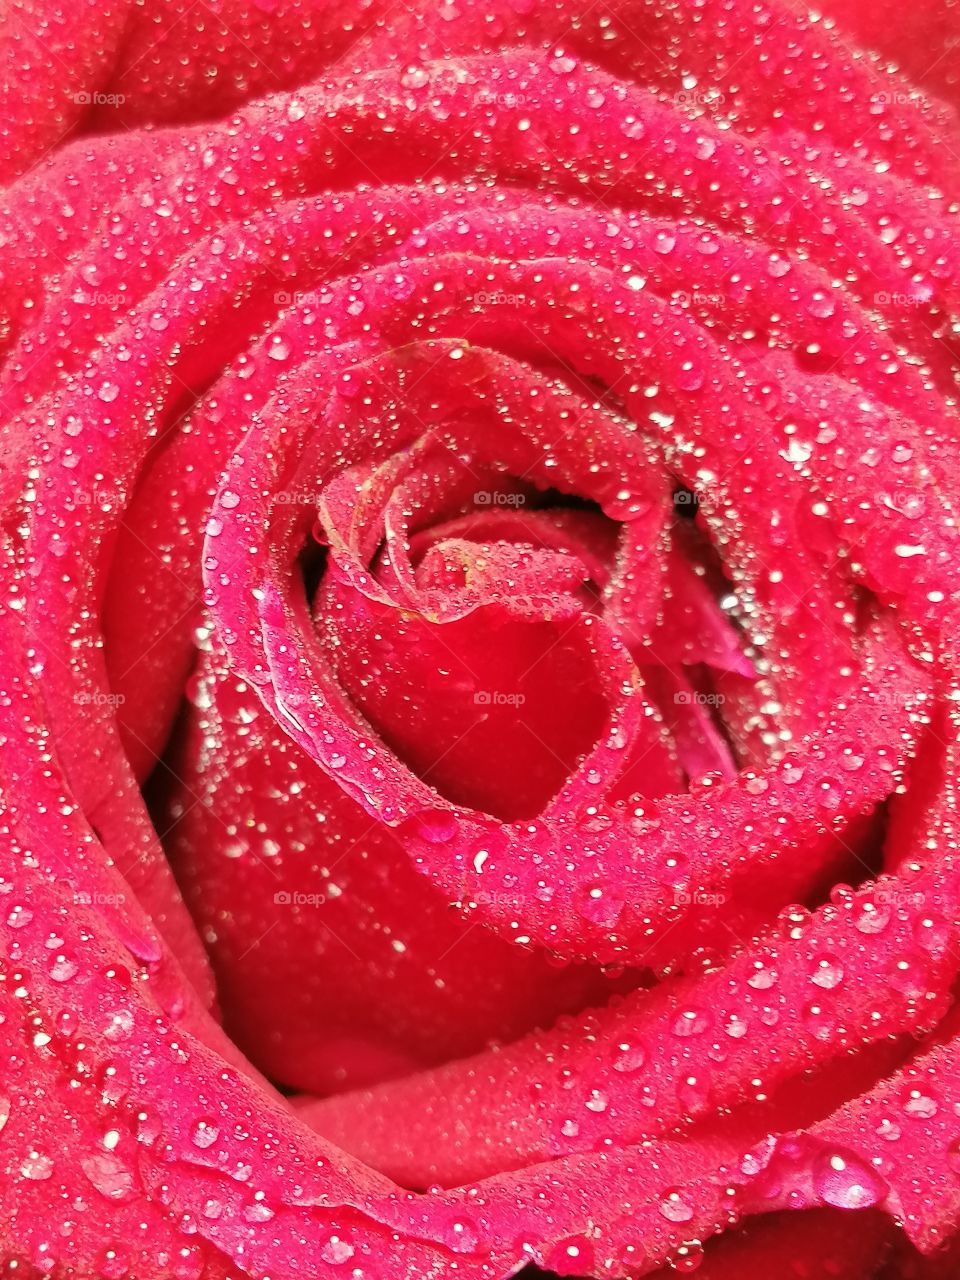 Red​ rose closeup by​ smartphone